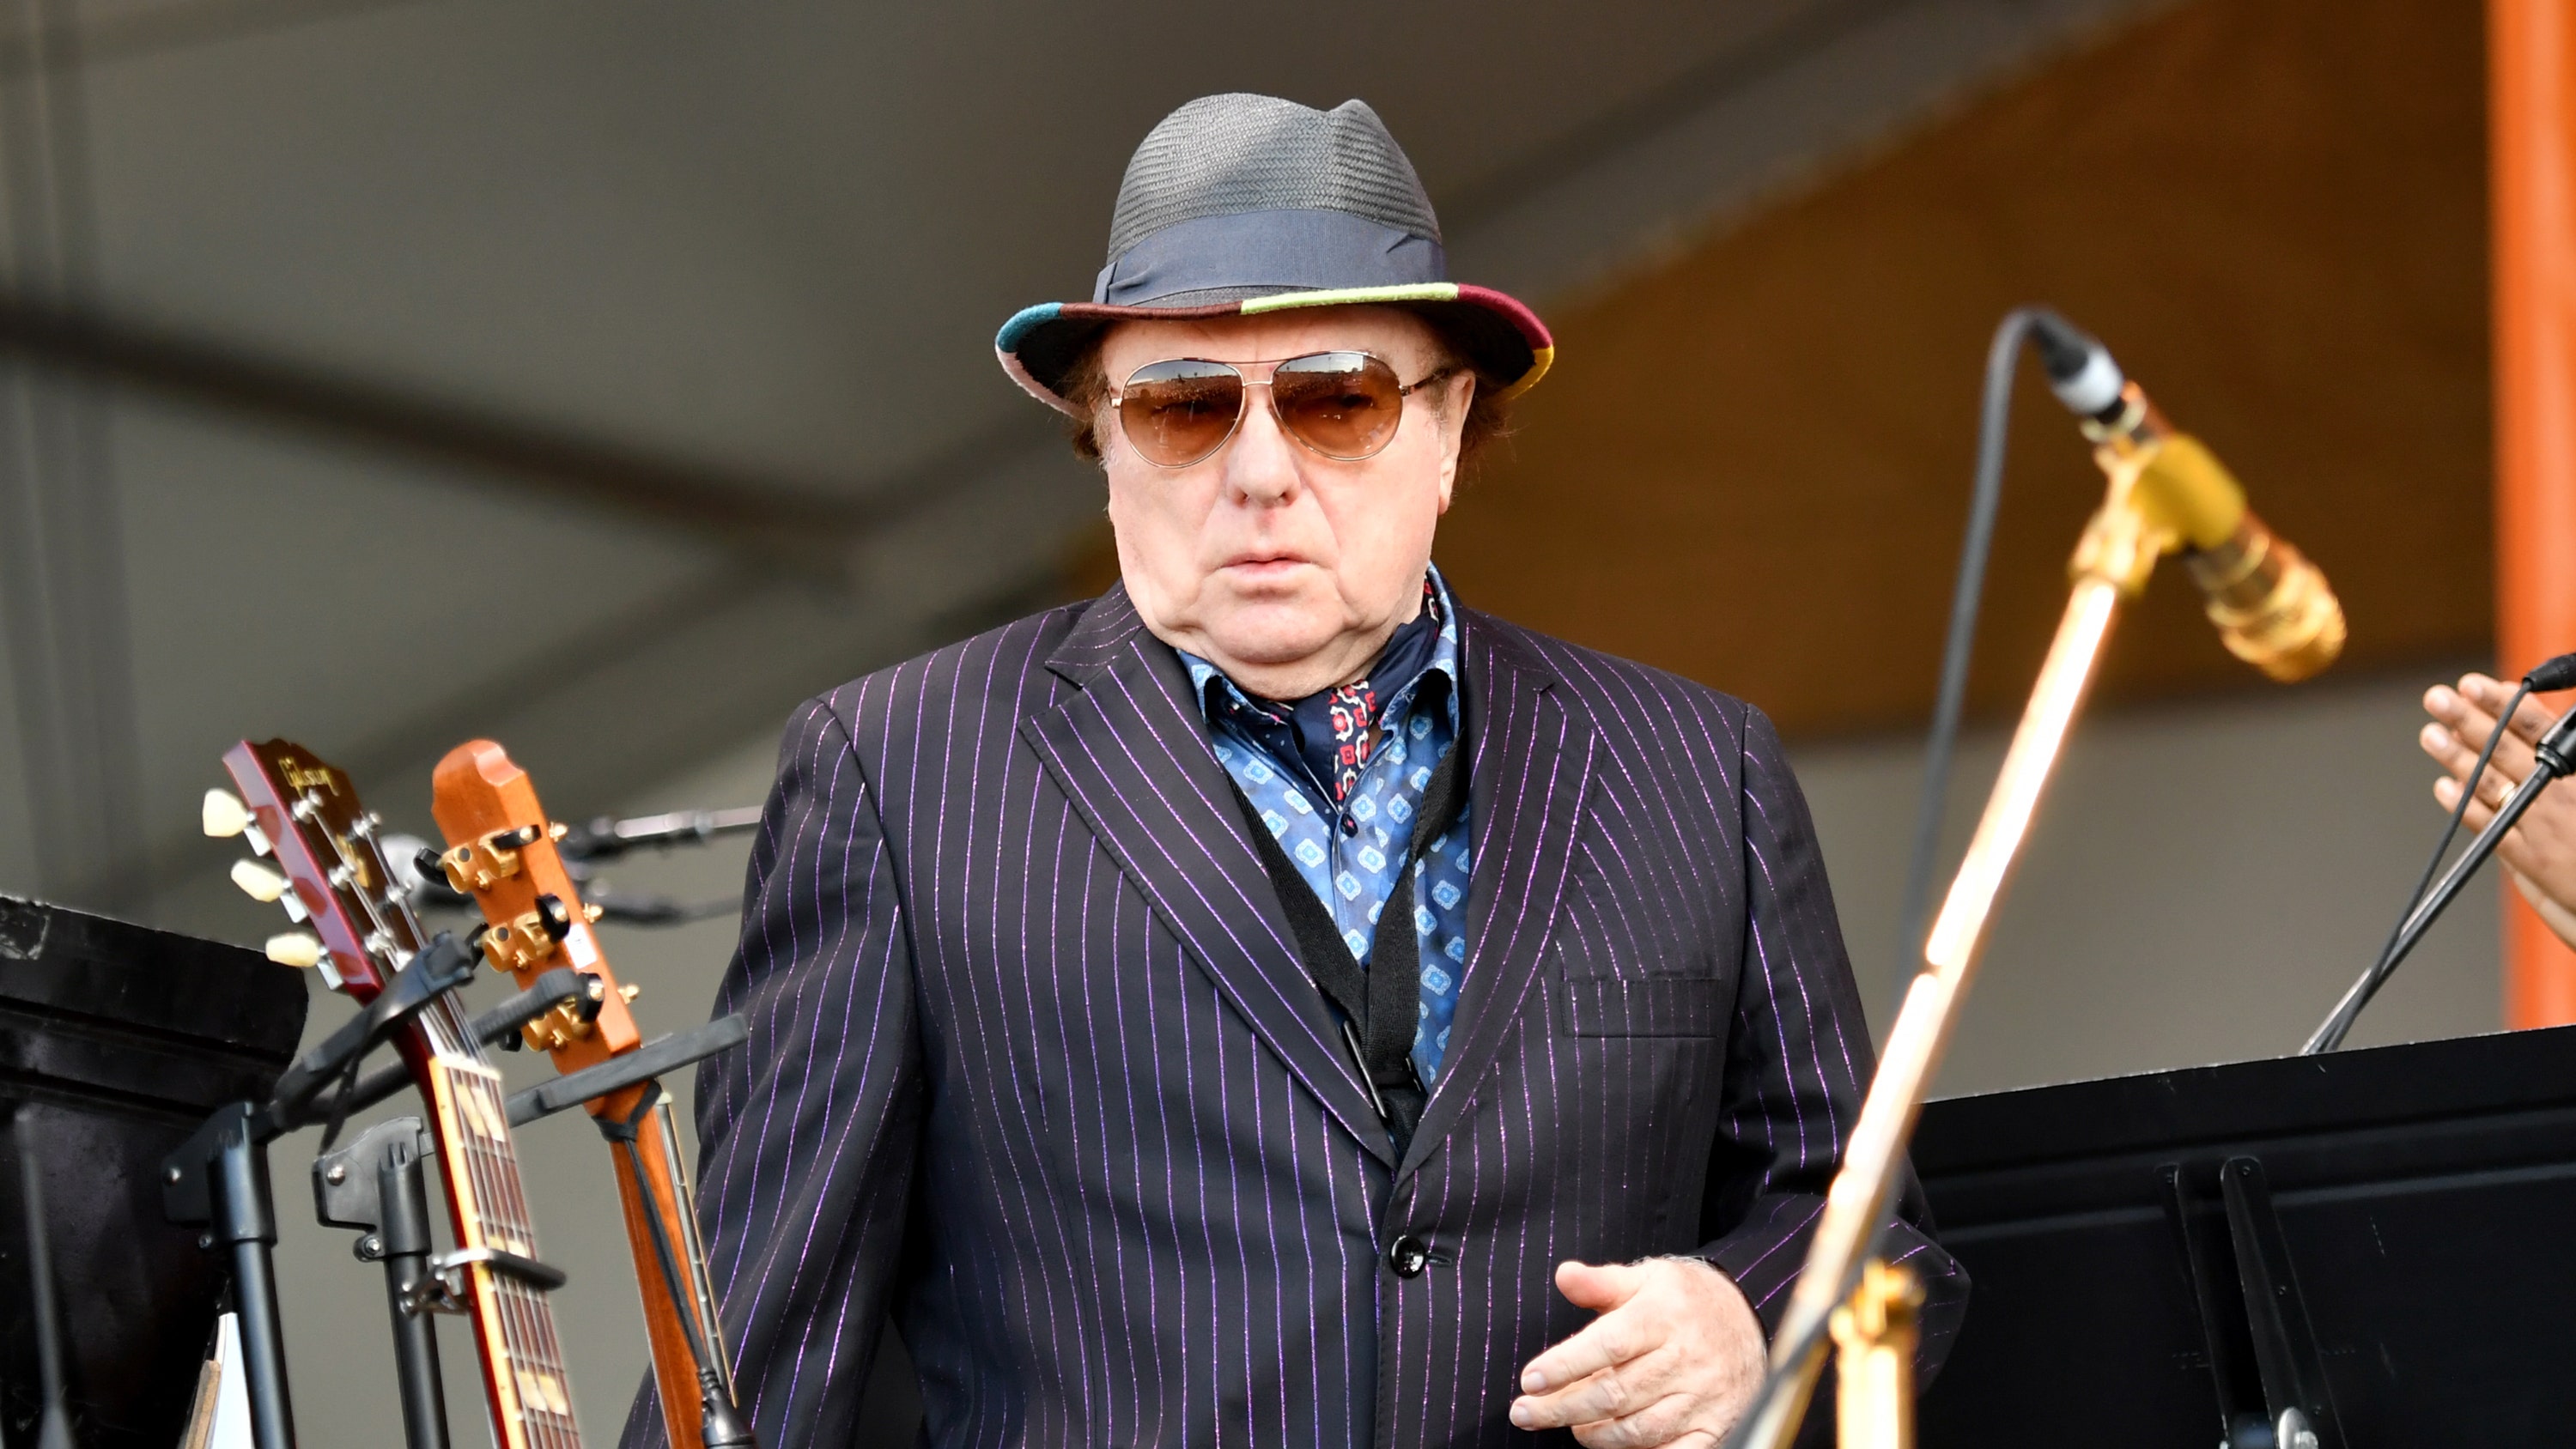 Van Morrison sued by Northern Ireland’s health minister over COVID criticism